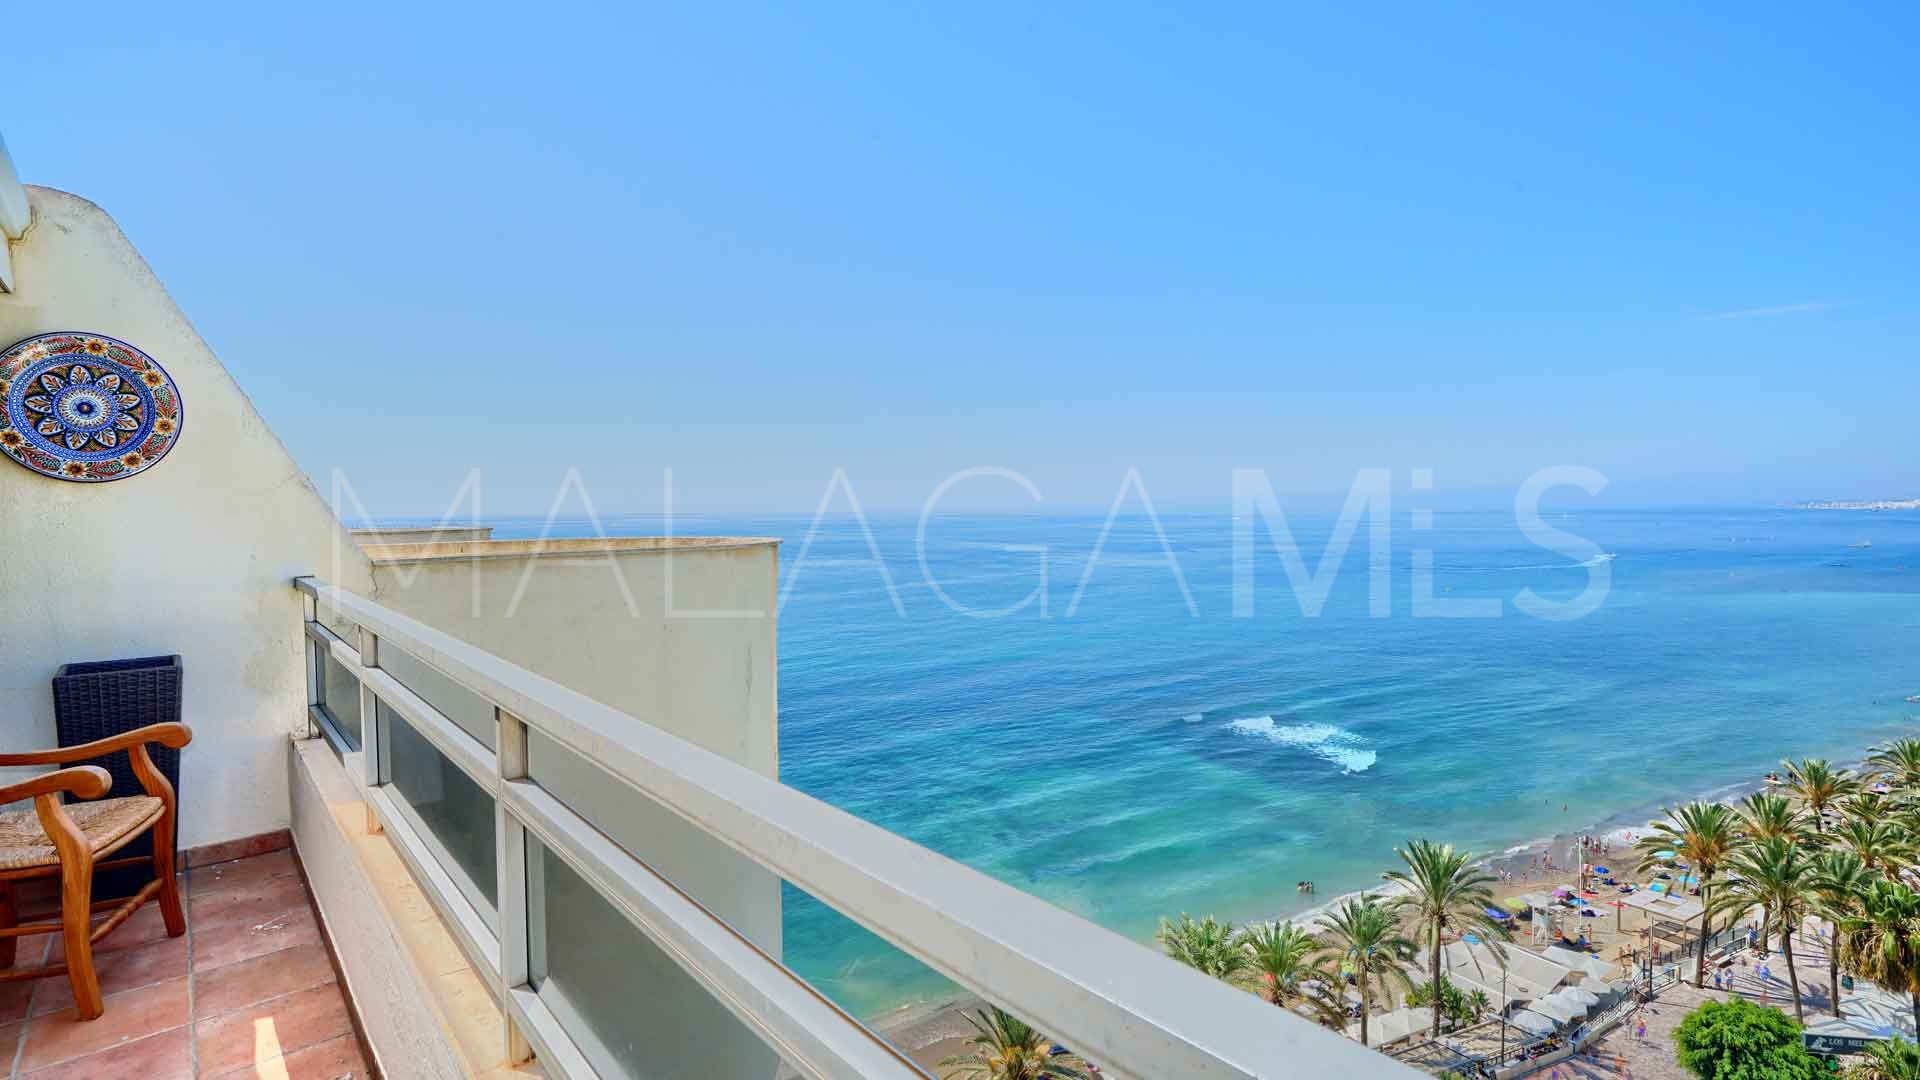 Marbella Centro 5 bedrooms penthouse for sale